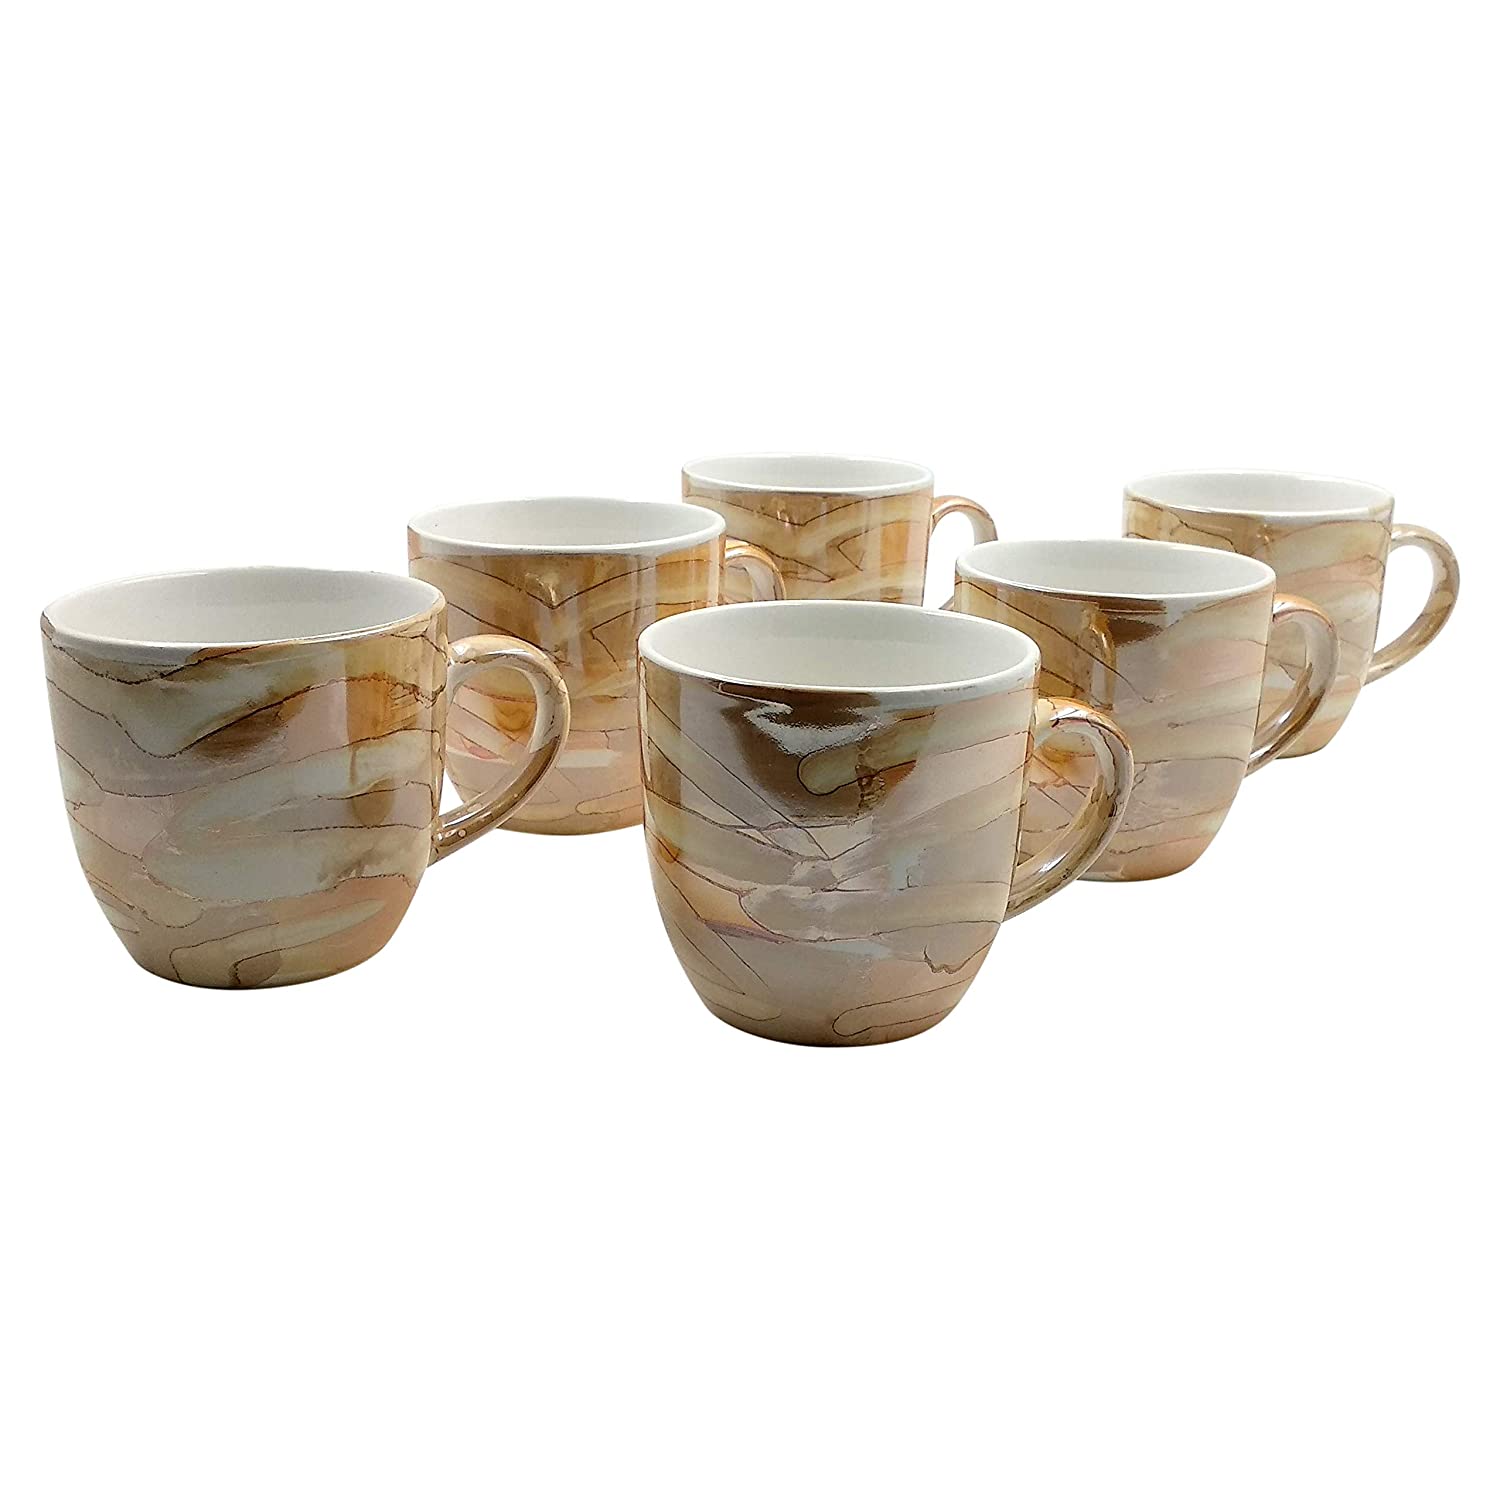 Golden Brown Gloss Finish Tea And Coffee Cups (Set Of 6), 150 ml